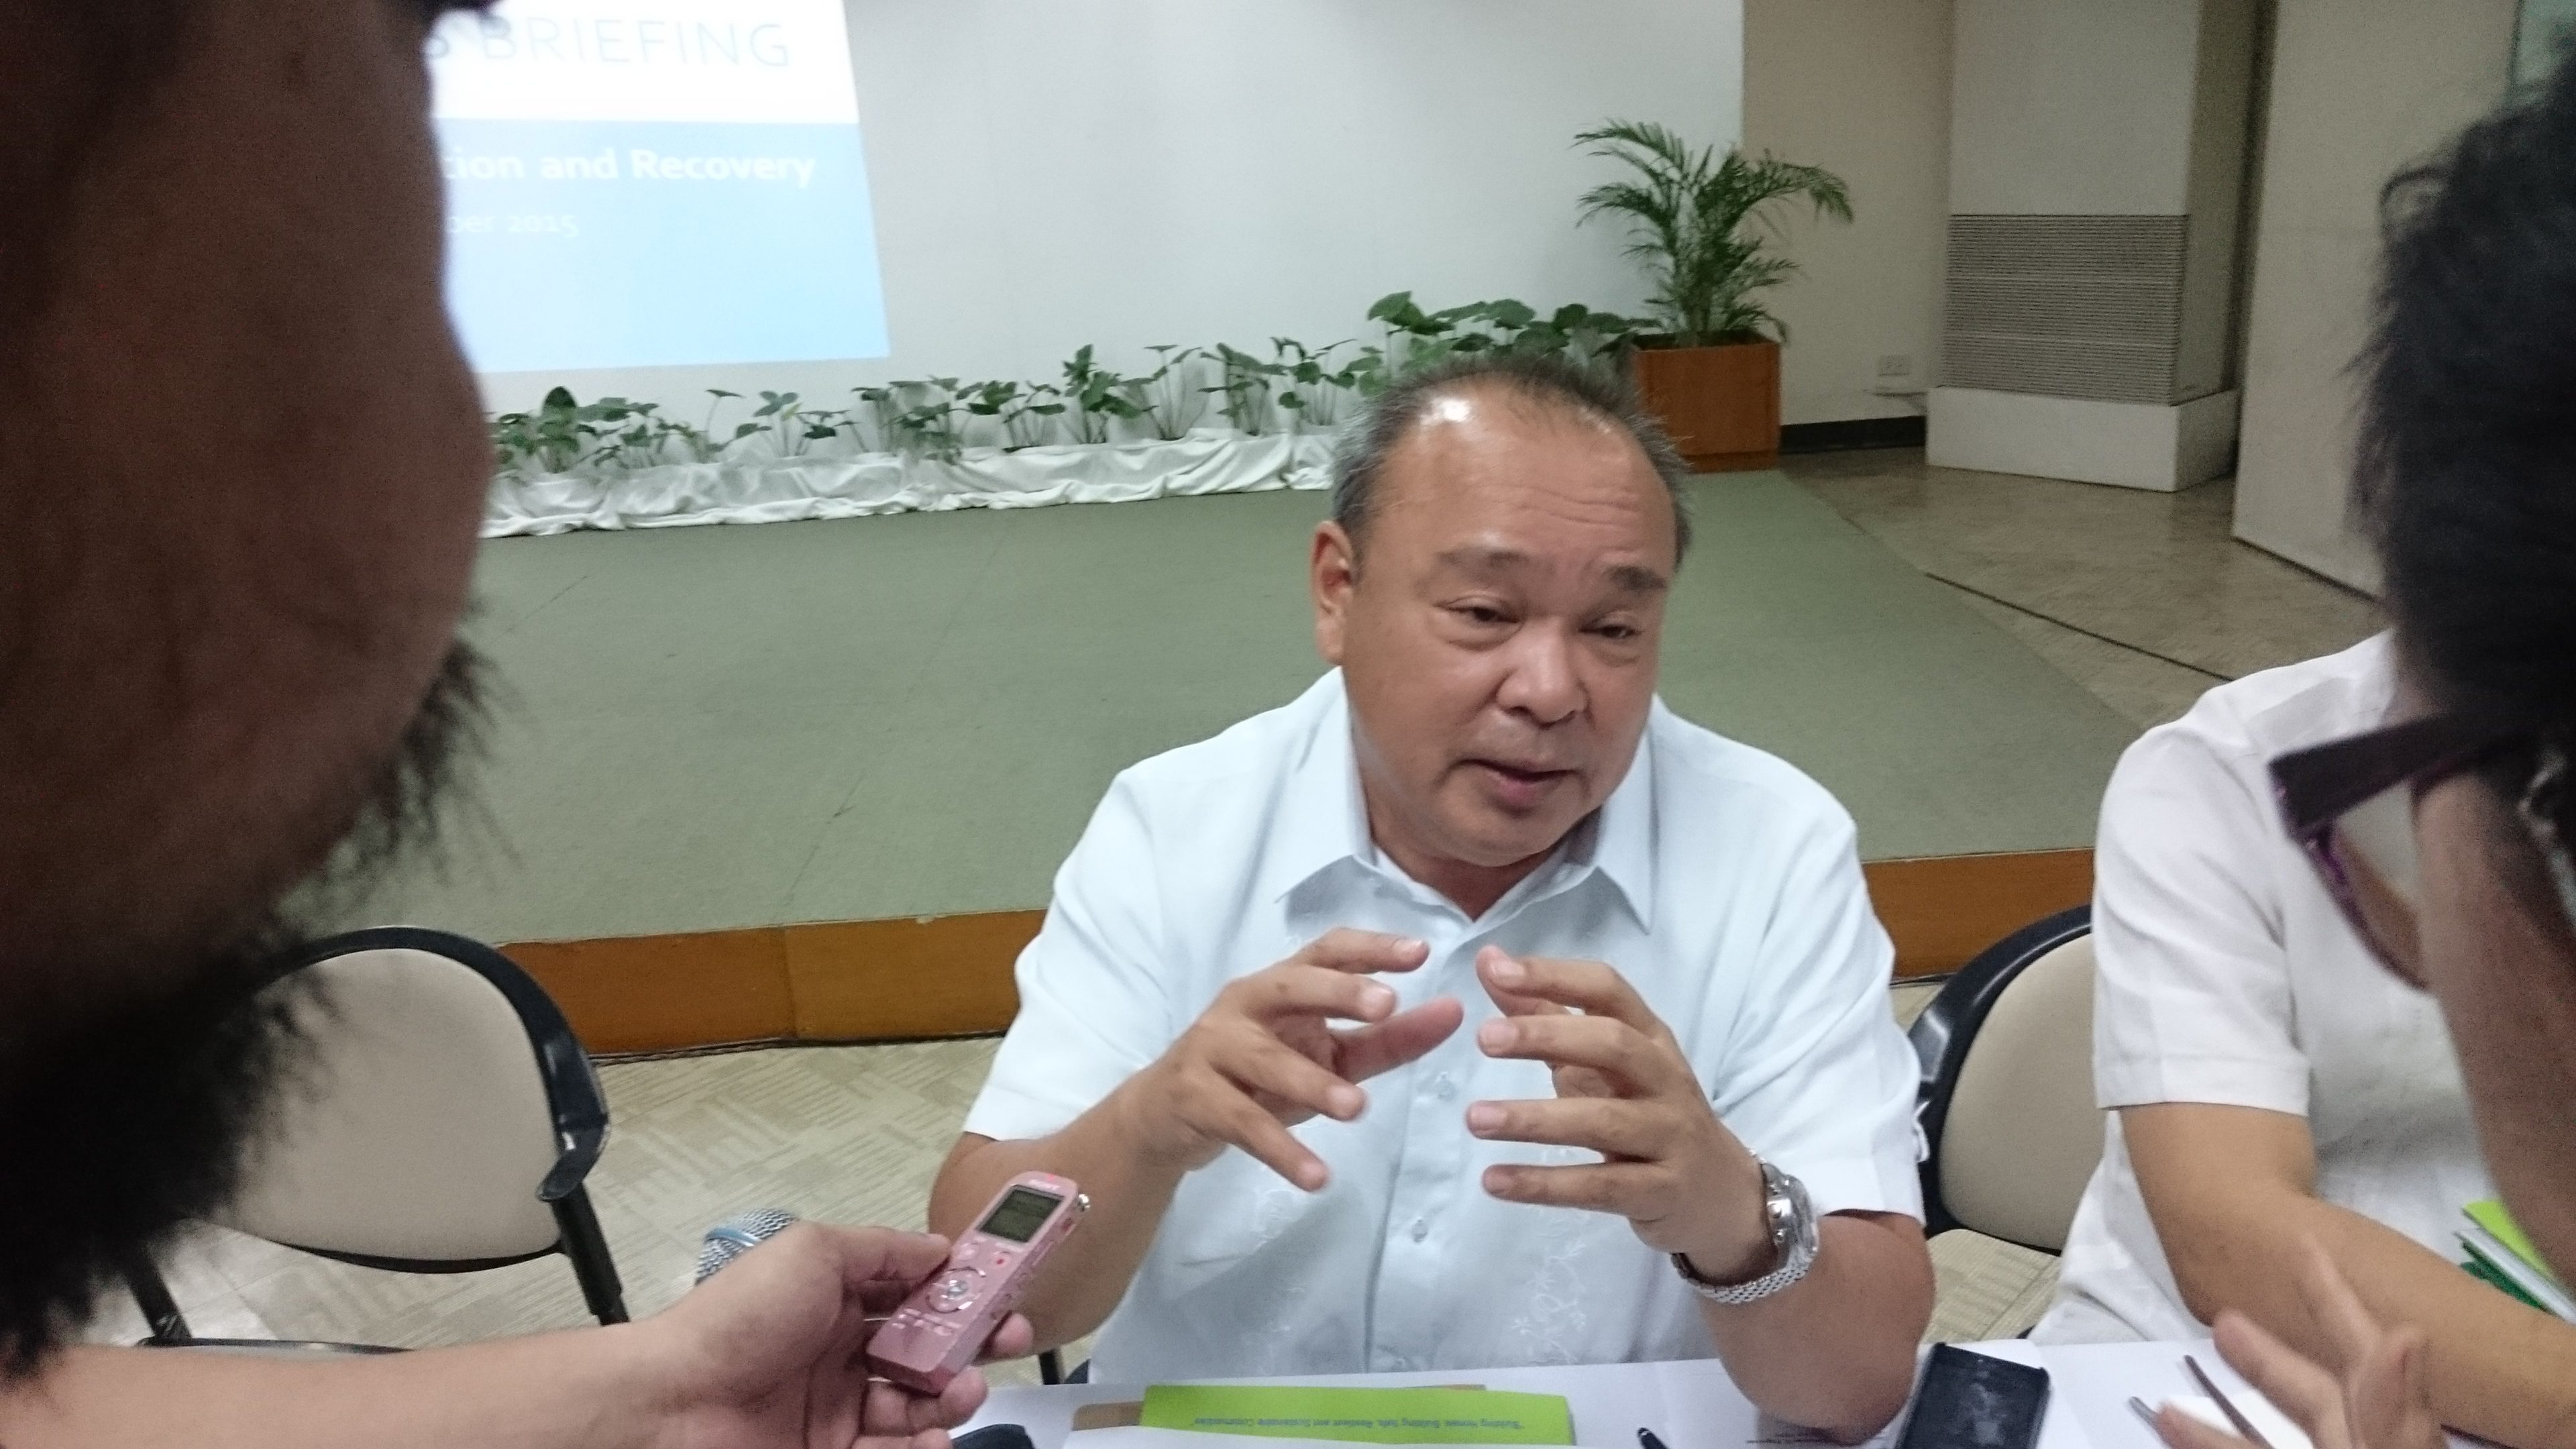 PROCUREMENT DIFFICULTIES. HUDCC chief Chito Cruz explains existing government procurement policies take 3 months and are partly to blame for the slow progress of resettlement housing.   